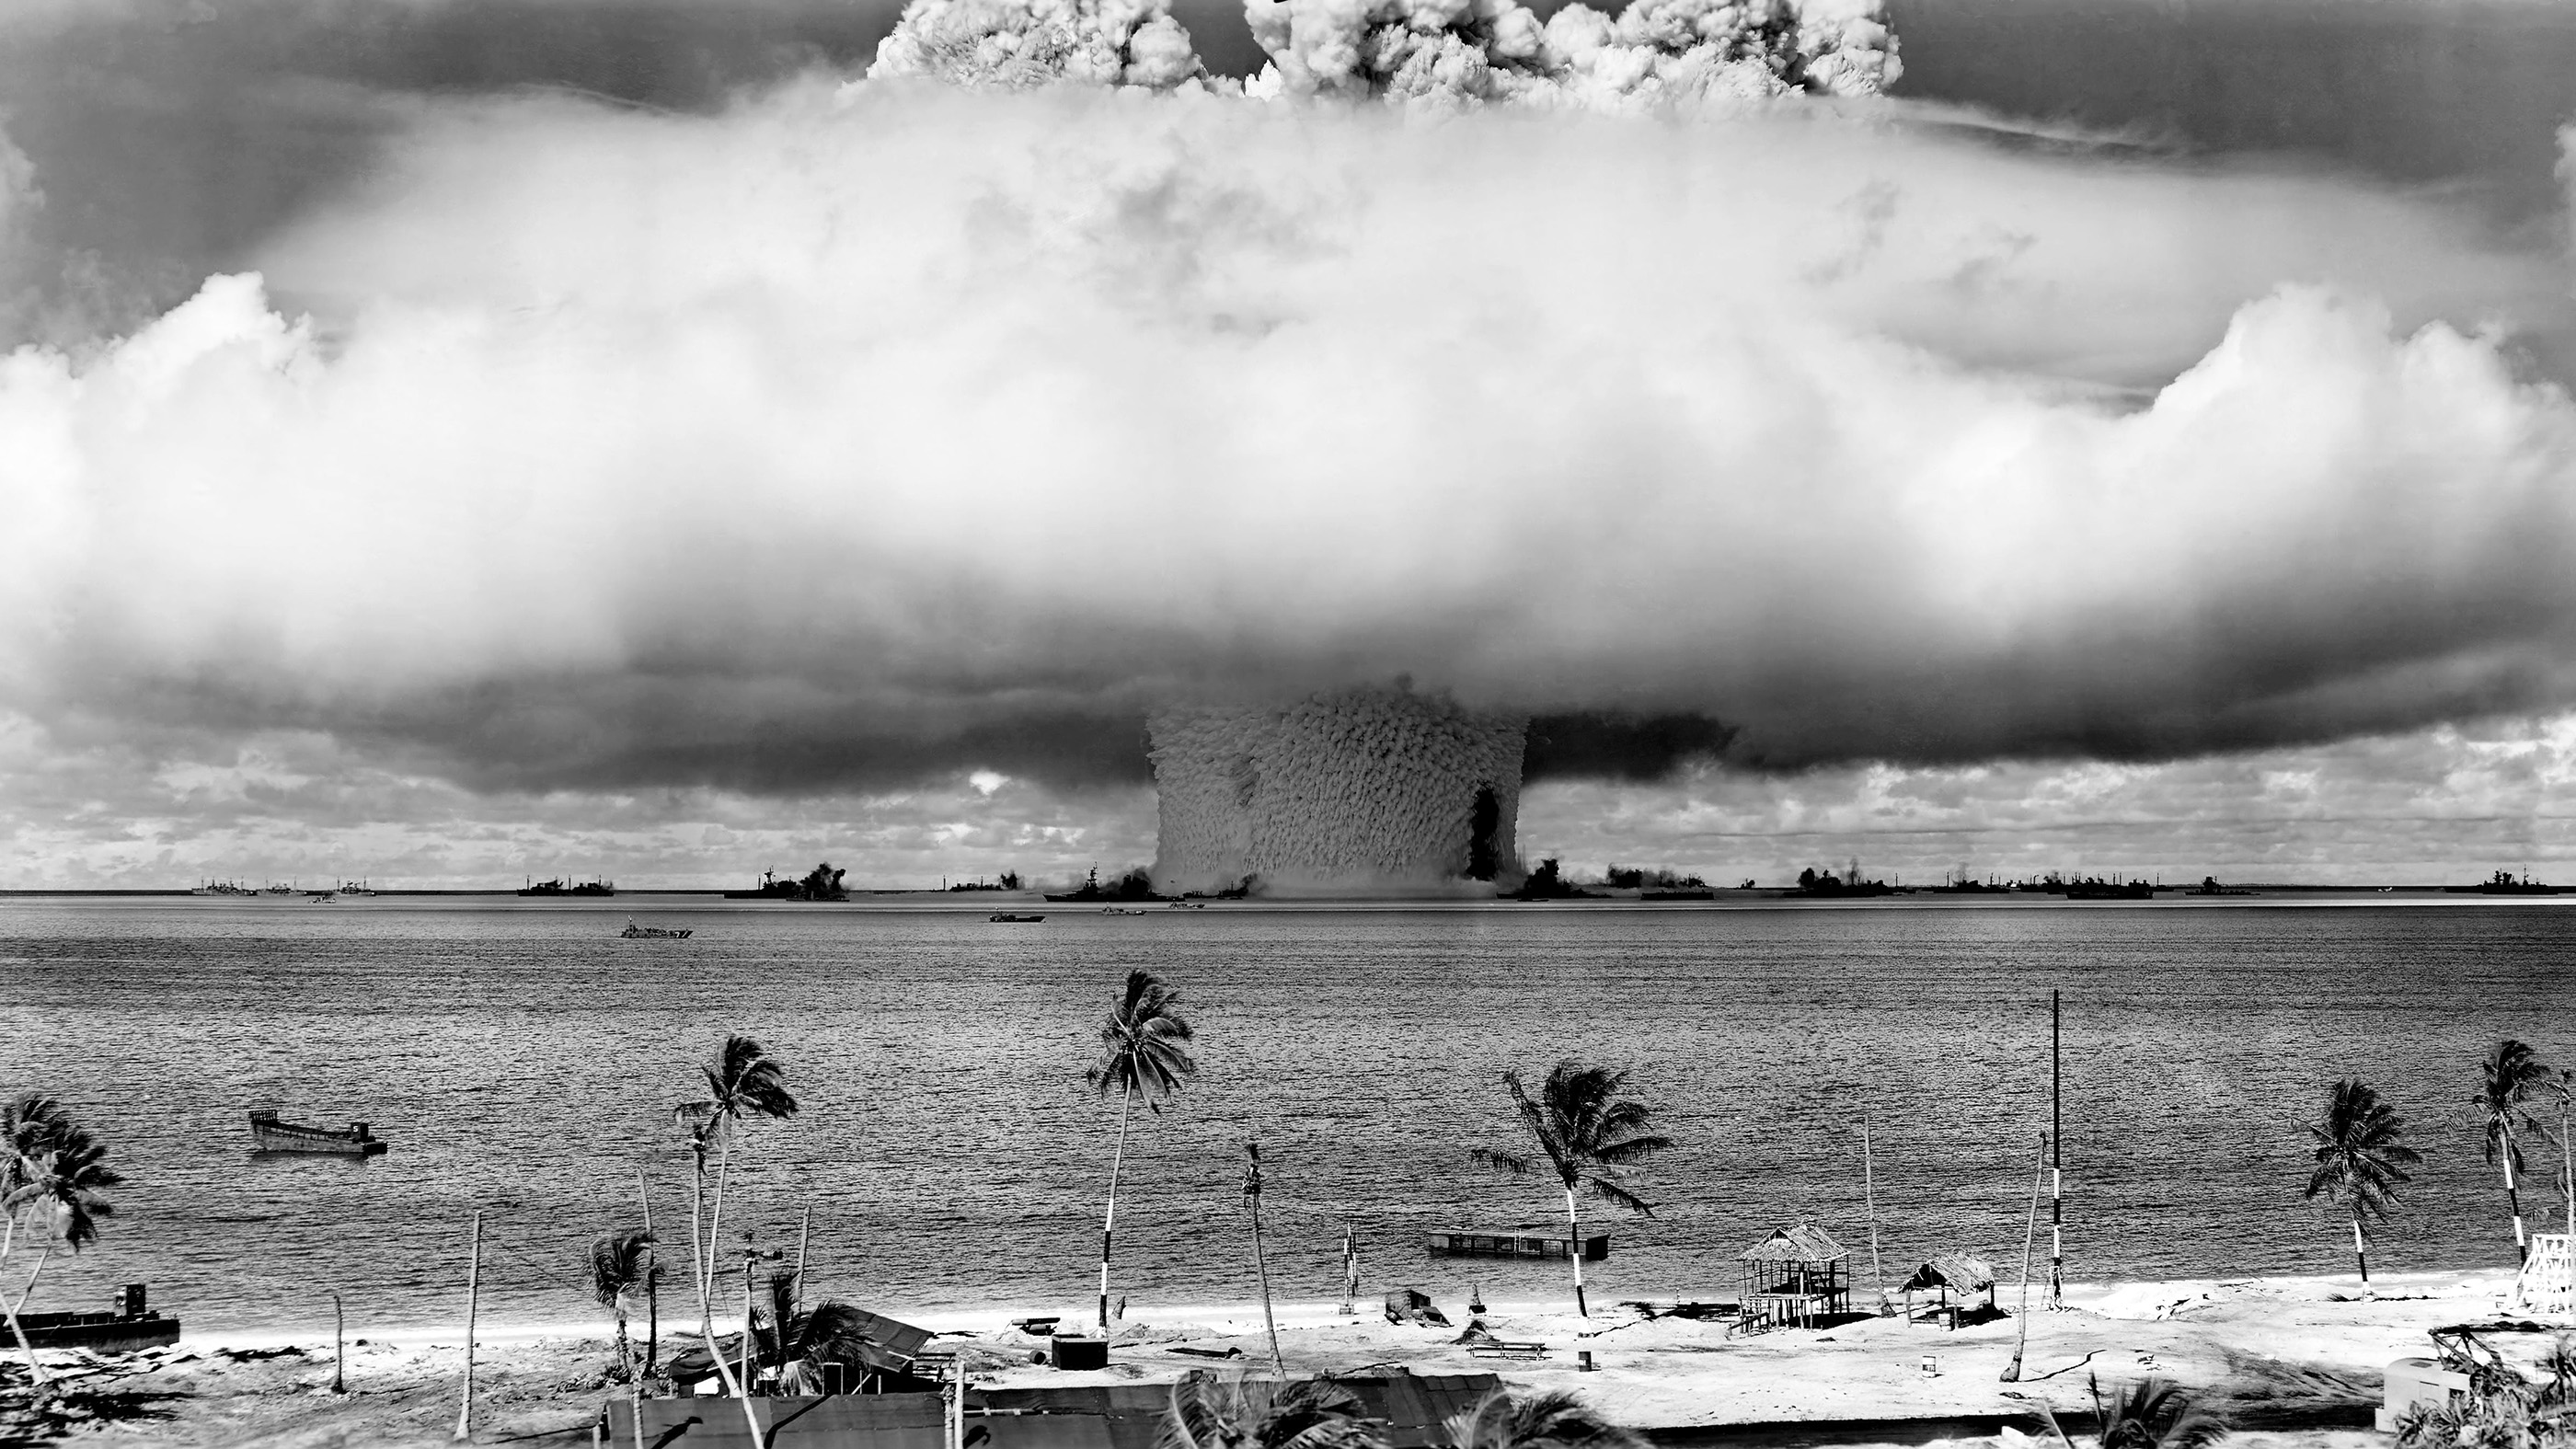 The underwater Baker nuclear explosion on July 25, 1946, created a huge mushroom-shaped cloud that spread radiation far and wide. Image taken from a tower on Bikini Island.